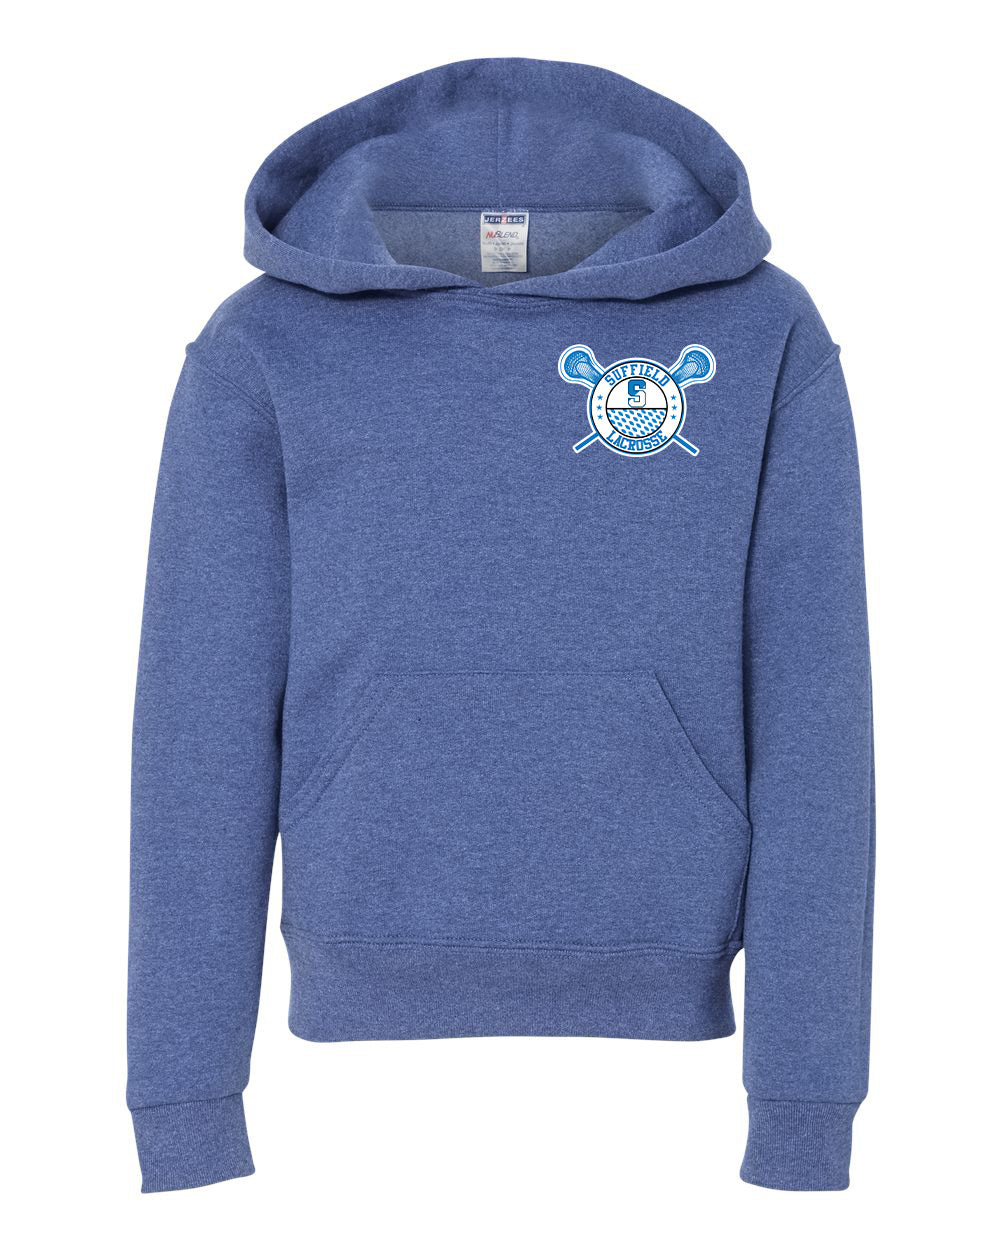 Suffield Youth Lacrosse Youth Hoodie "Circle Corner" - 996YR (color options available)